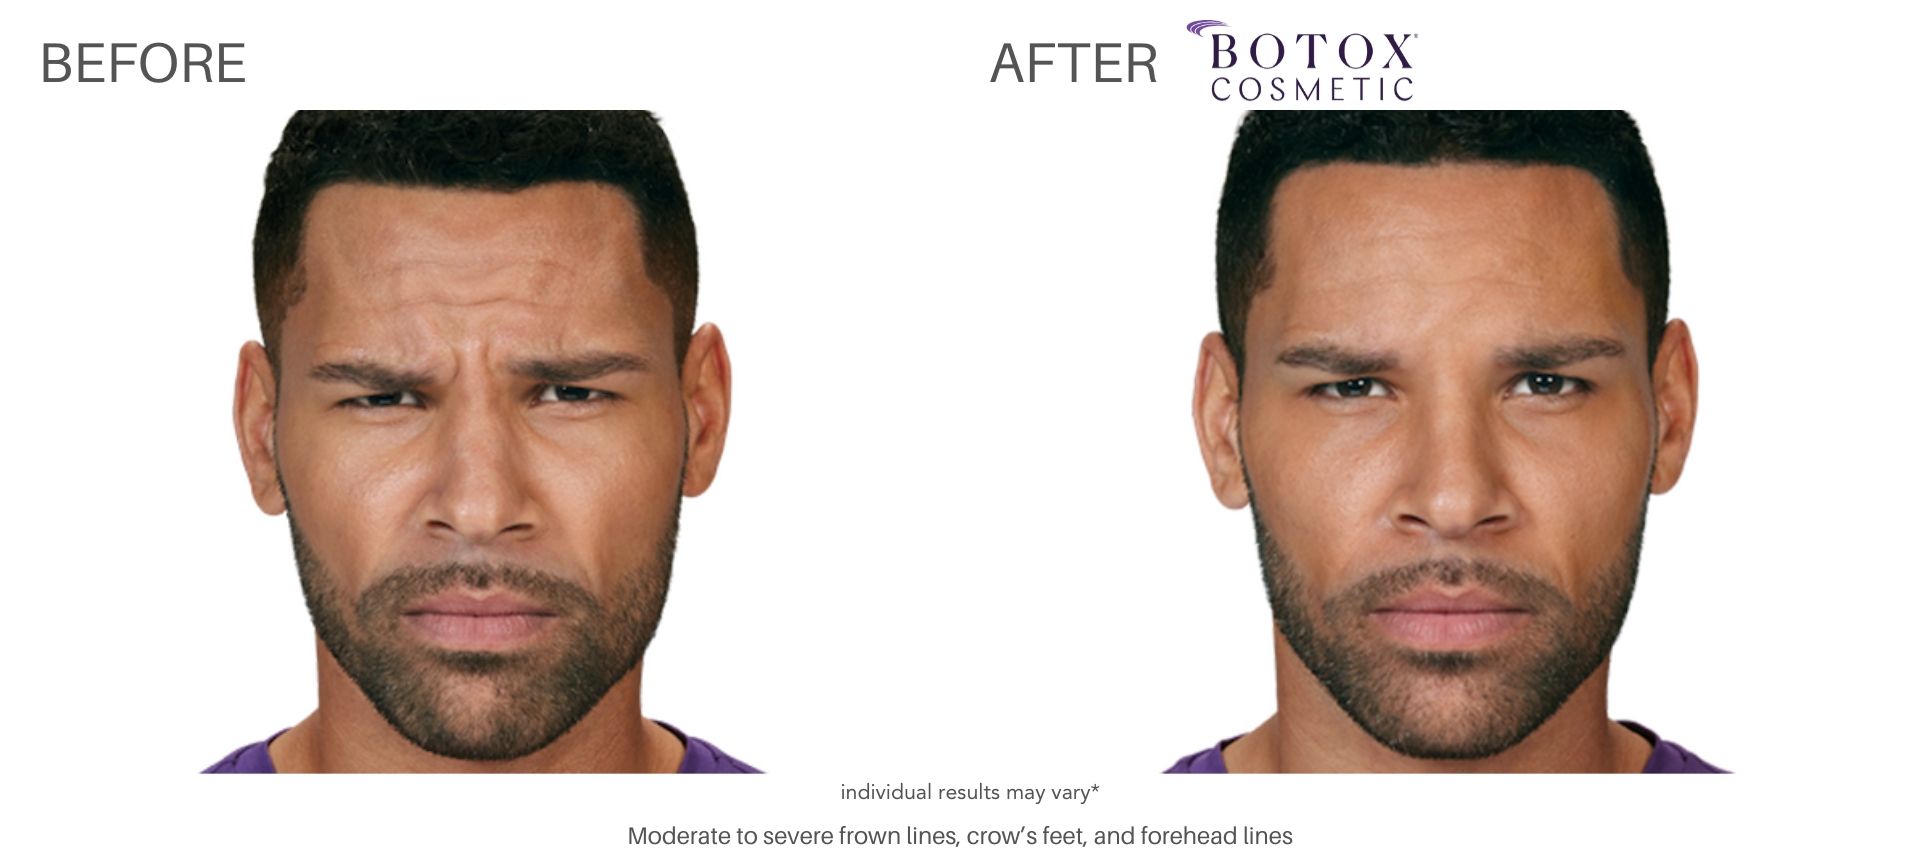 Botox before and after pictures in Chatham, NJ